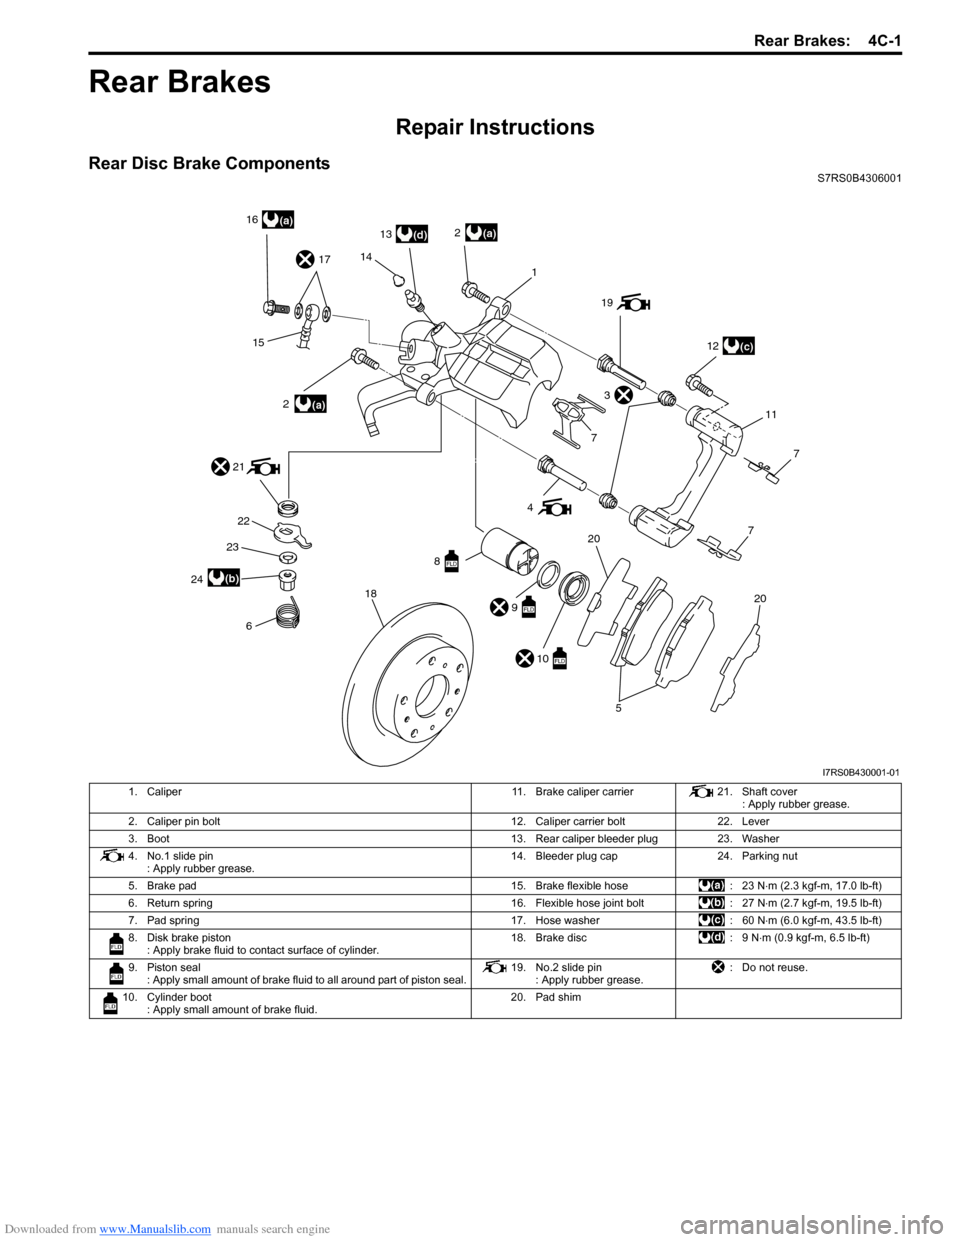 SUZUKI SWIFT 2008 2.G Service User Guide Downloaded from www.Manualslib.com manuals search engine Rear Brakes:  4C-1
Brakes
Rear Brakes
Repair Instructions
Rear Disc Brake ComponentsS7RS0B4306001
(d)
(c)
(a)
(a)
(a)16171413
2
1
15 2 19
12
11